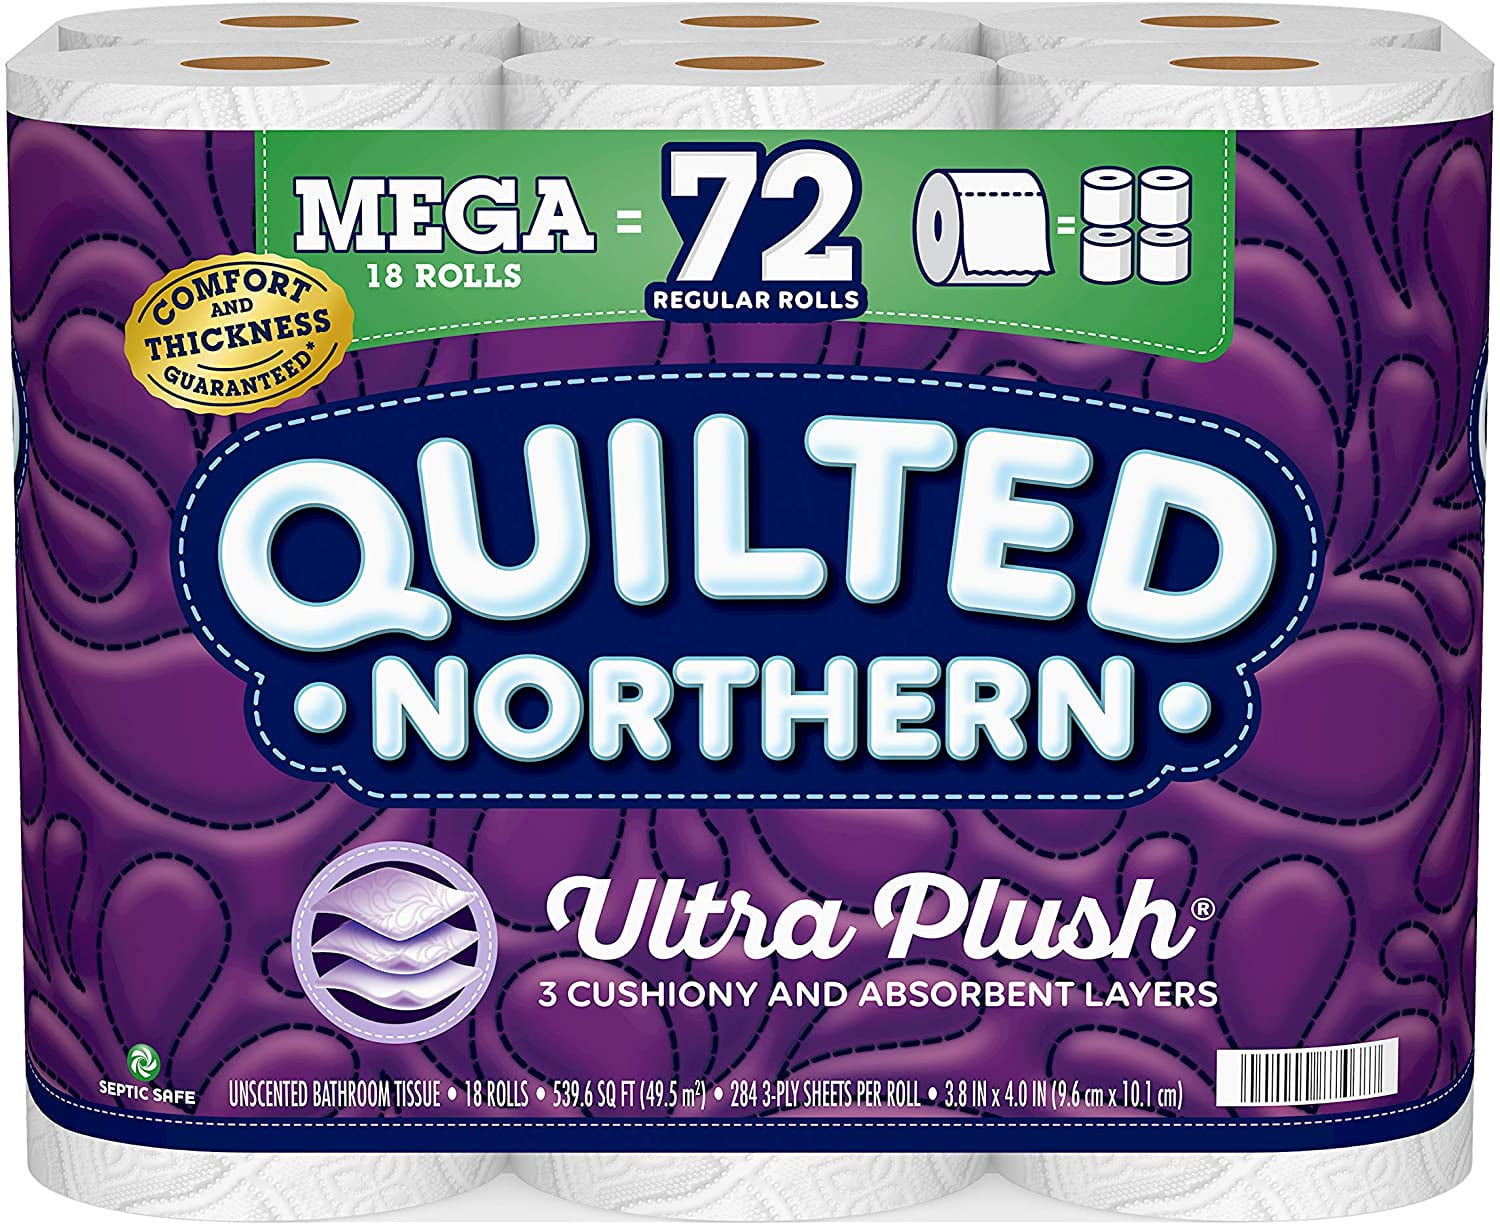 Quilted Northern Ultra Plush Toilet Paper (255 Sheets/Roll, 36 Rolls)